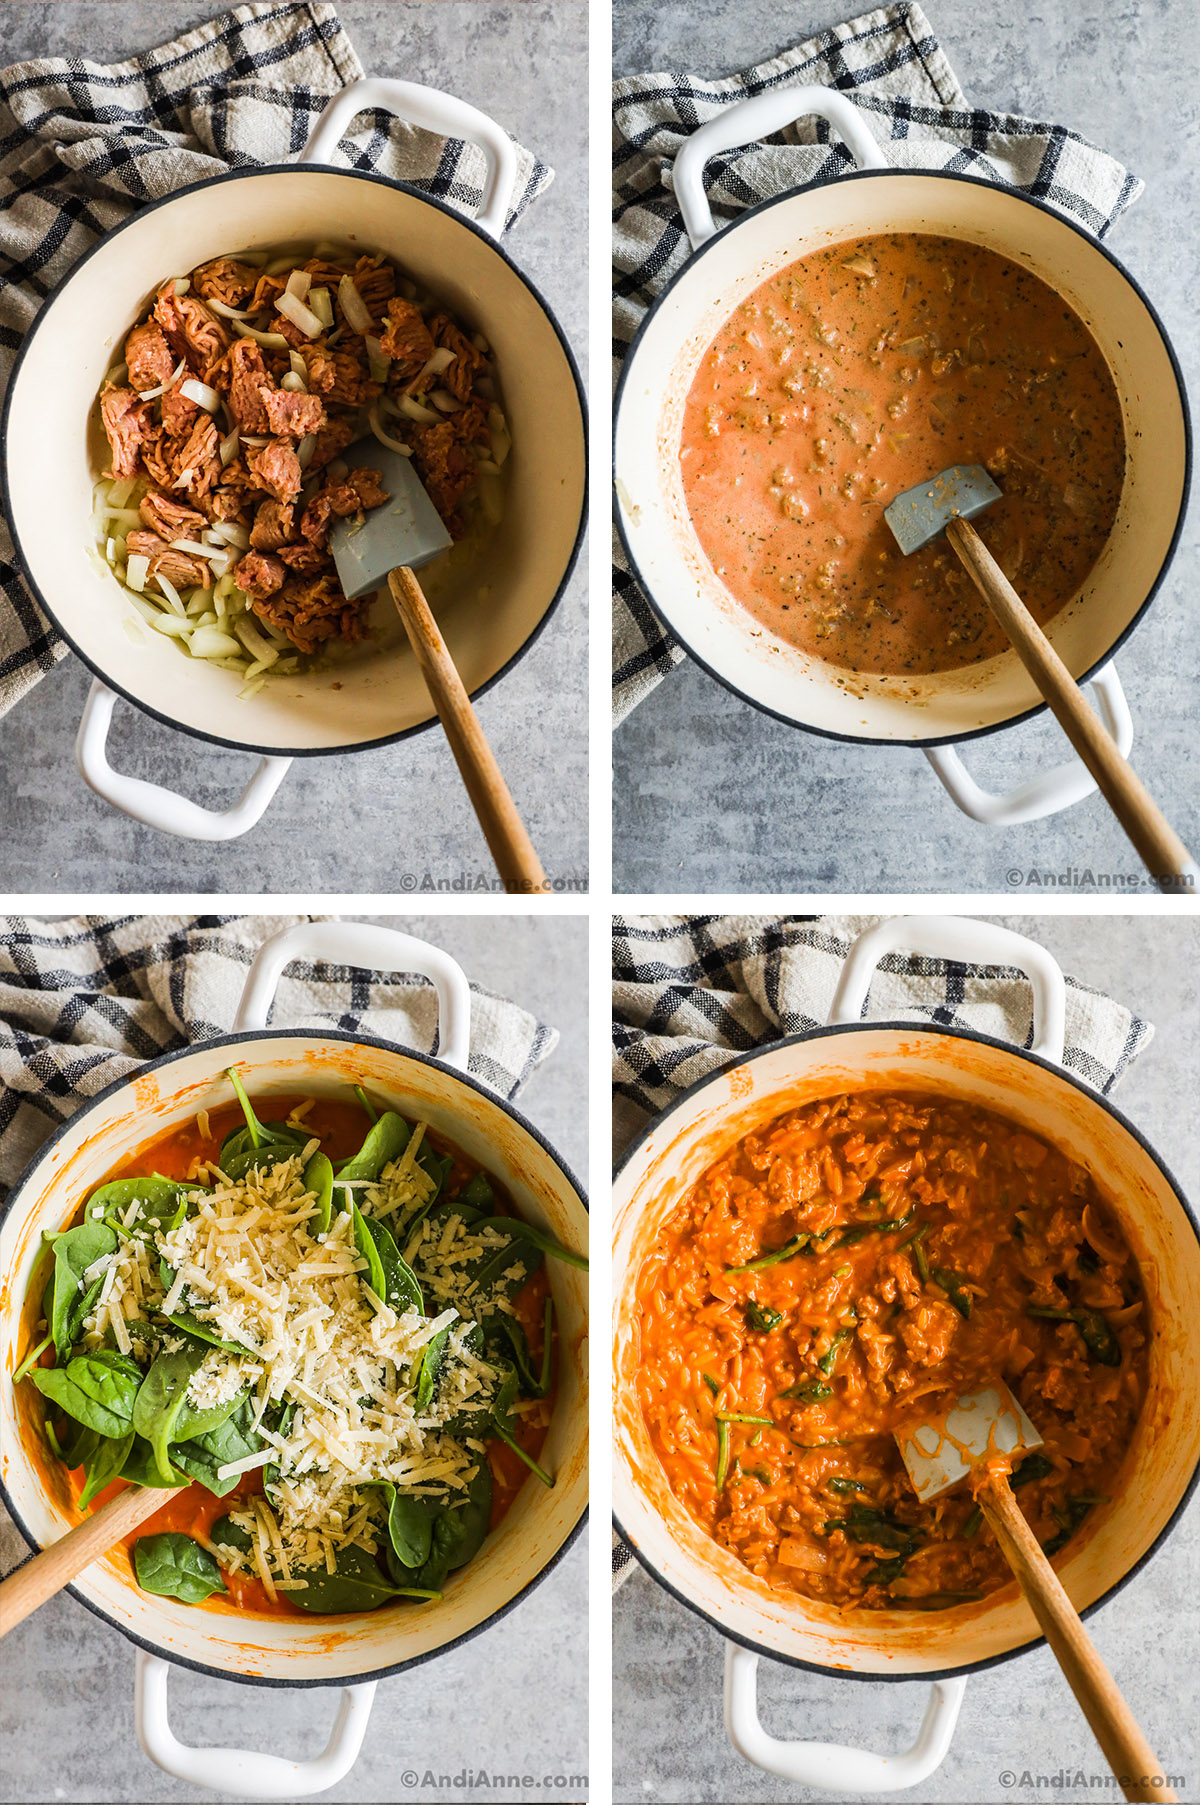 Four images showing various steps to make recipe. First is raw ground turkey and onion, second is liquid with ground beef, third is spinach and grated parmesan dumped over tomato sauce mixture, fourth is ground turkey orzo recipe.